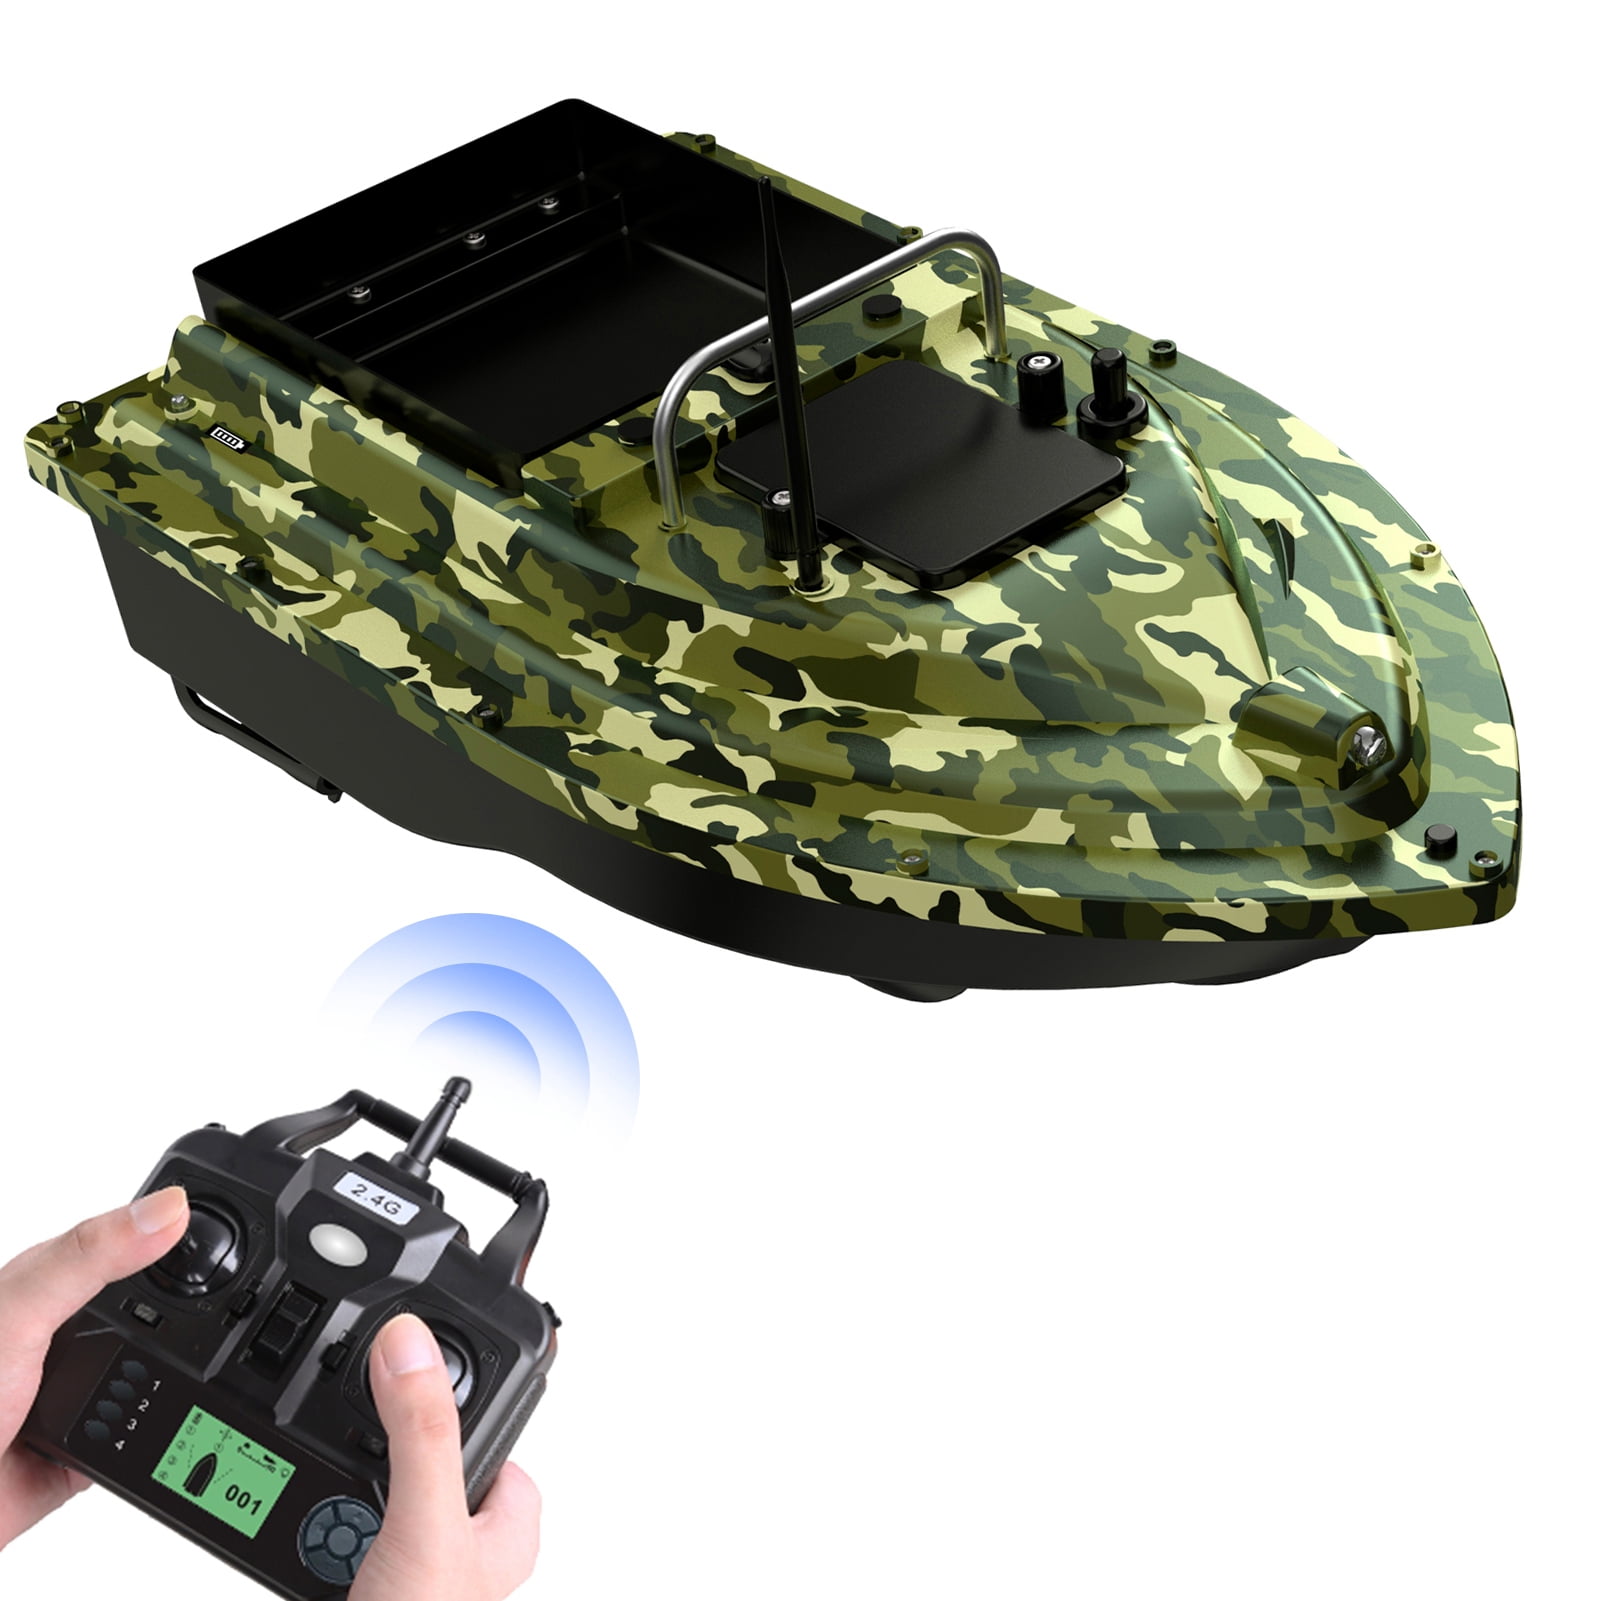 Dadypet GPS Fishing Bait Boat with Remote Control, Large Bait